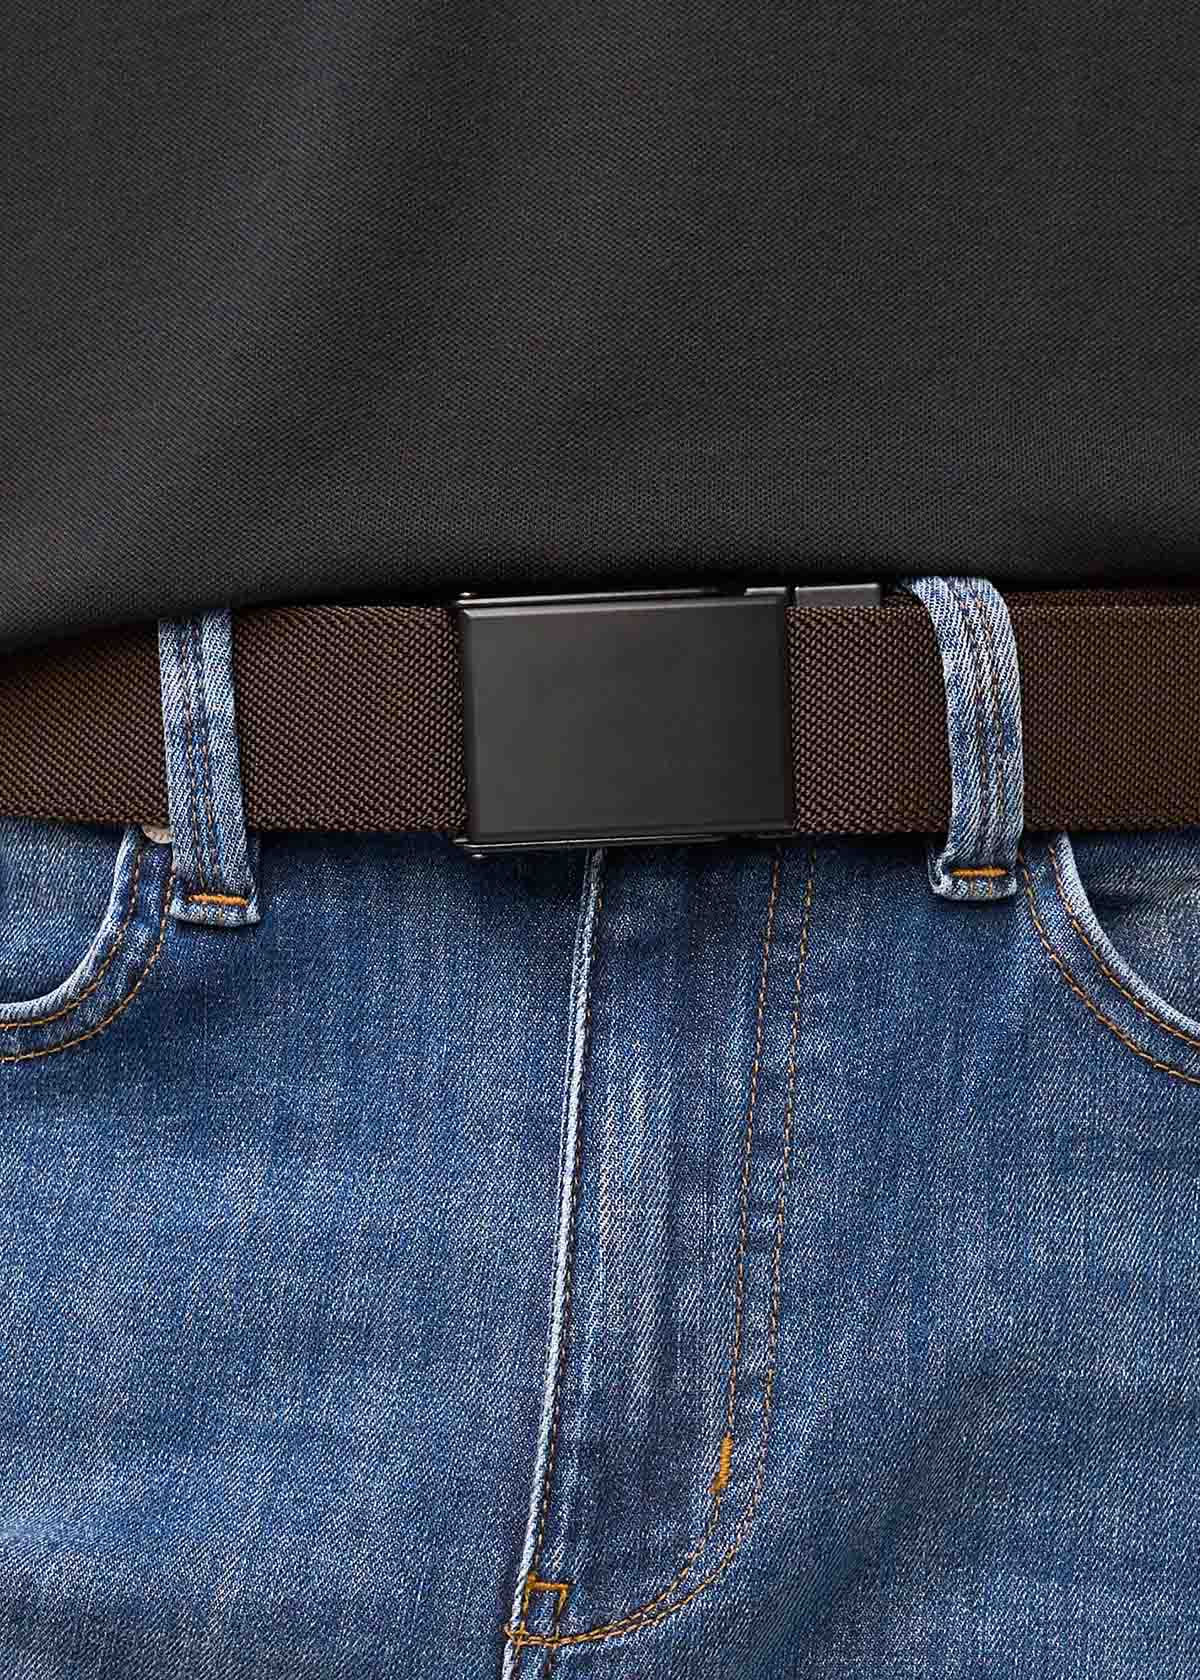 mens navy and brown reversible stretch belt buckle close up